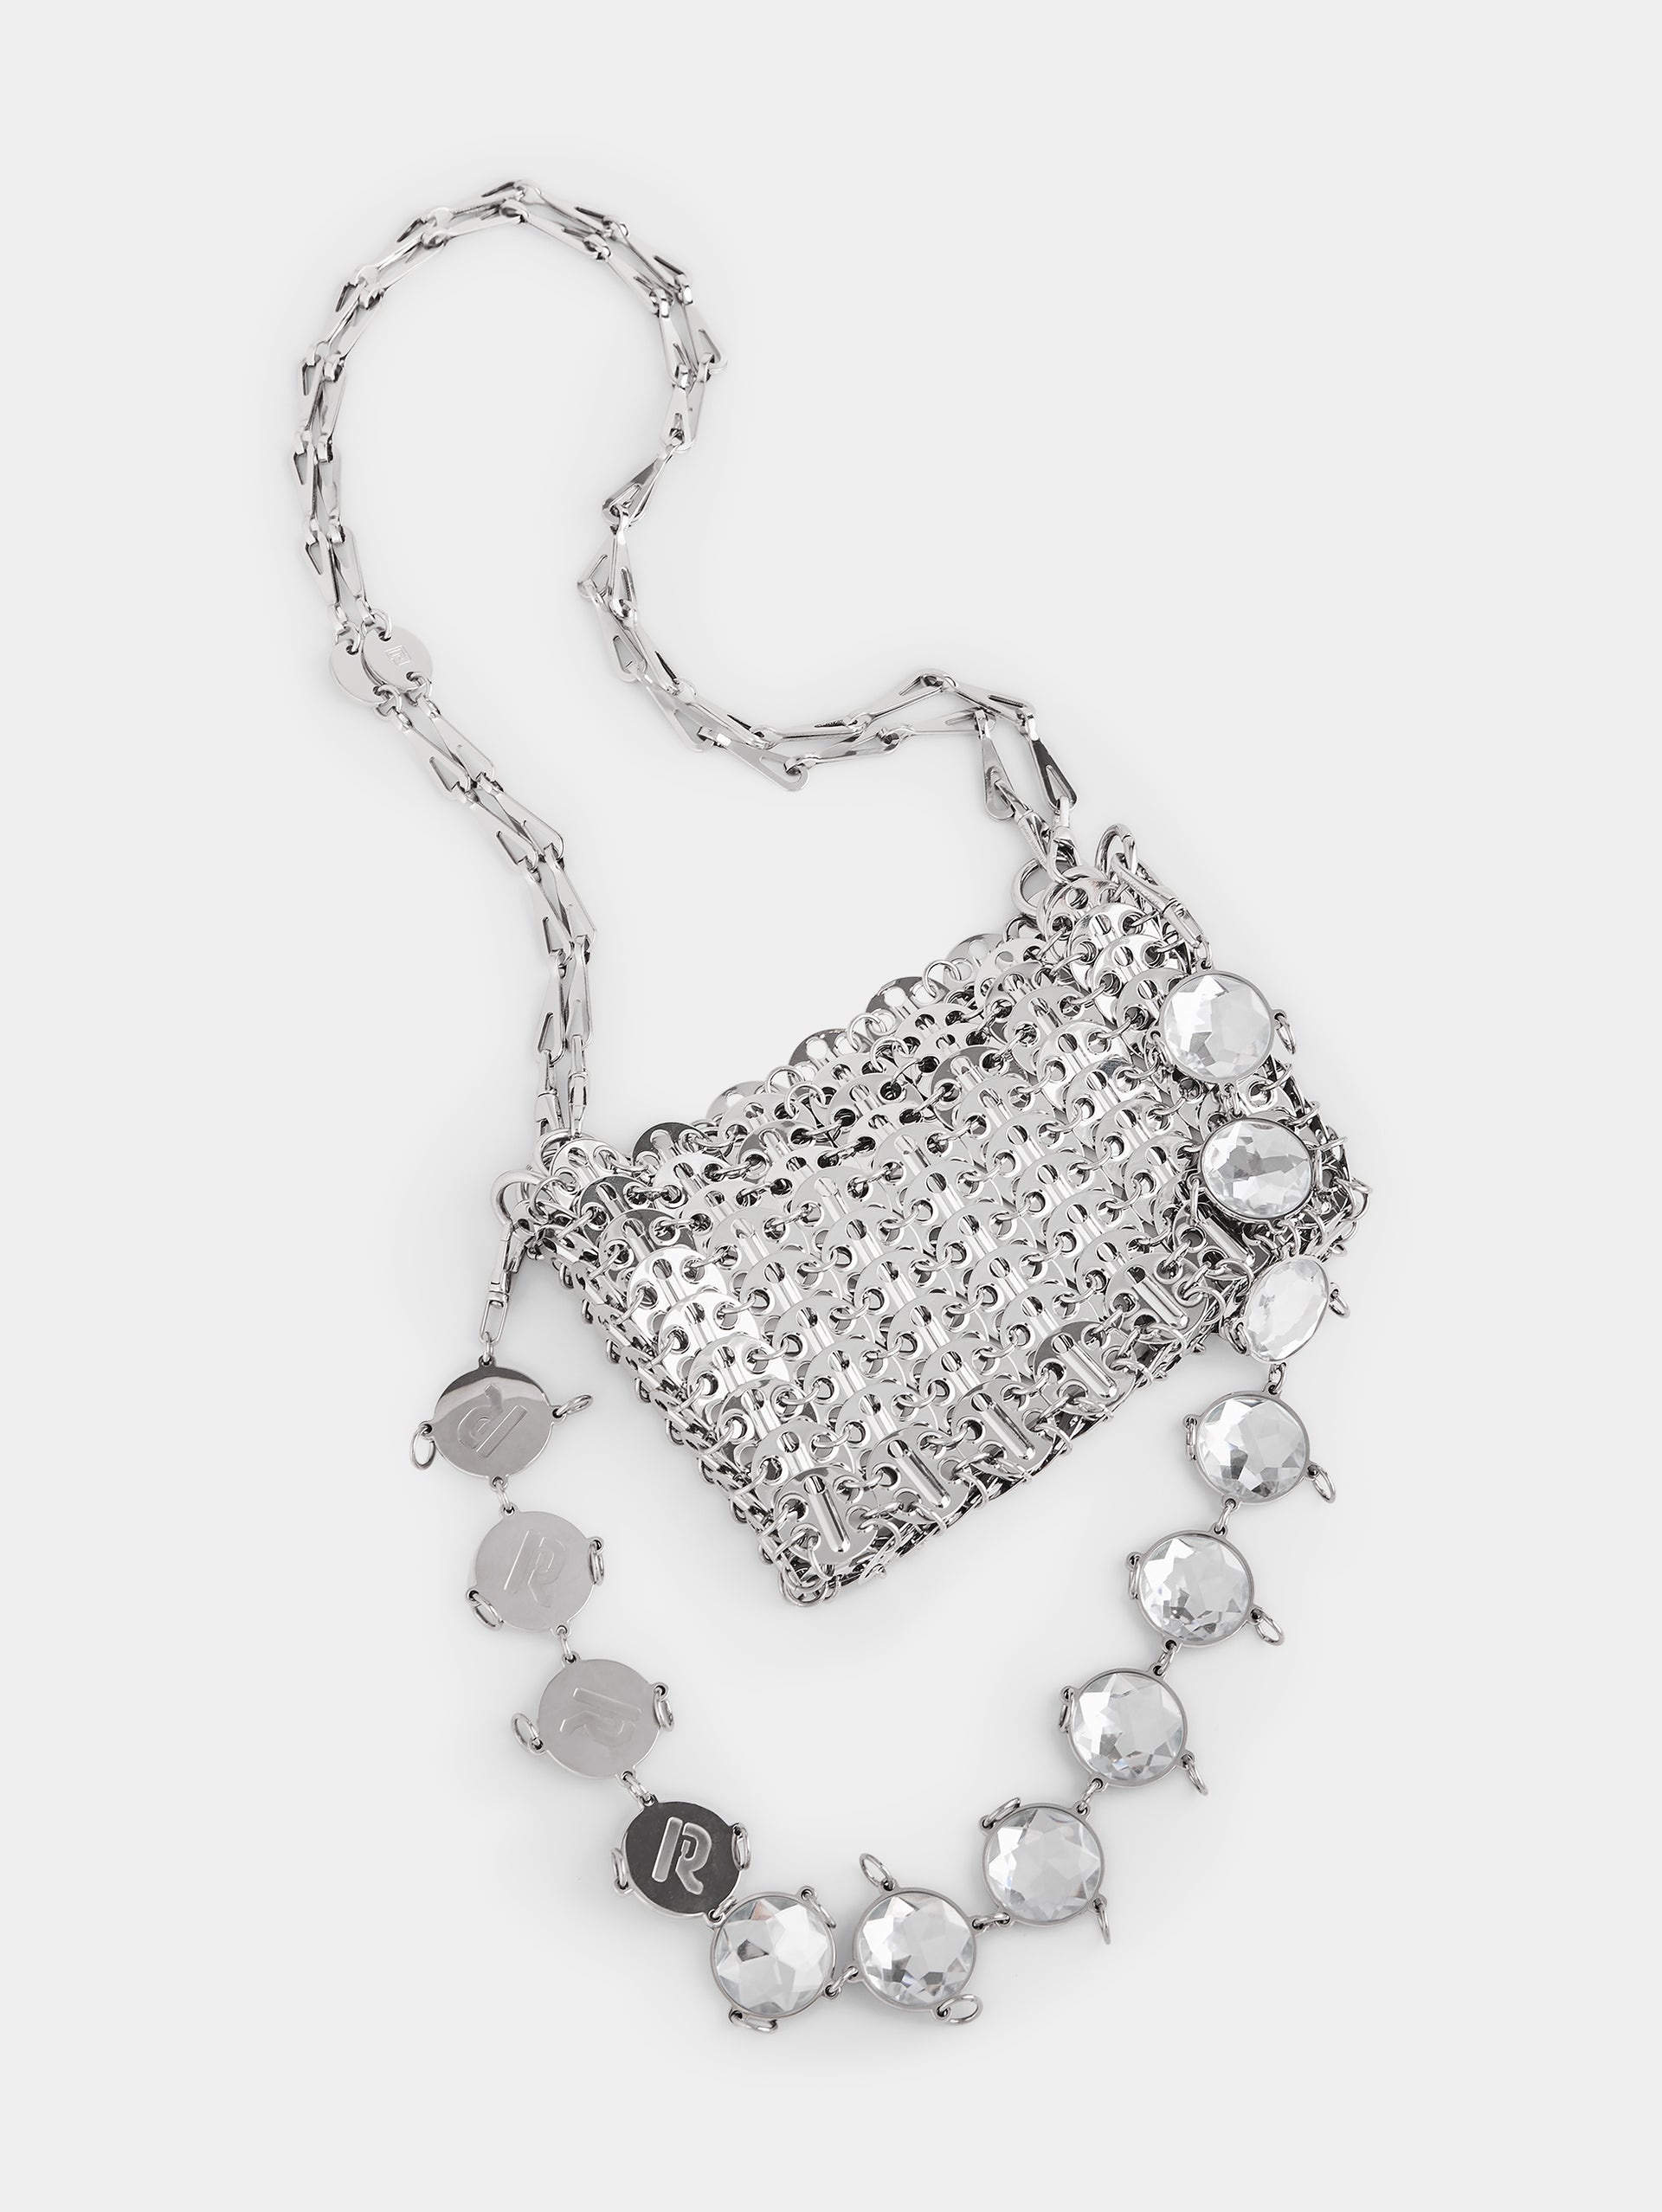 ICONIC NANO 1969 BAG WITH OVERSIZED CRYSTALS CHAIN - 6